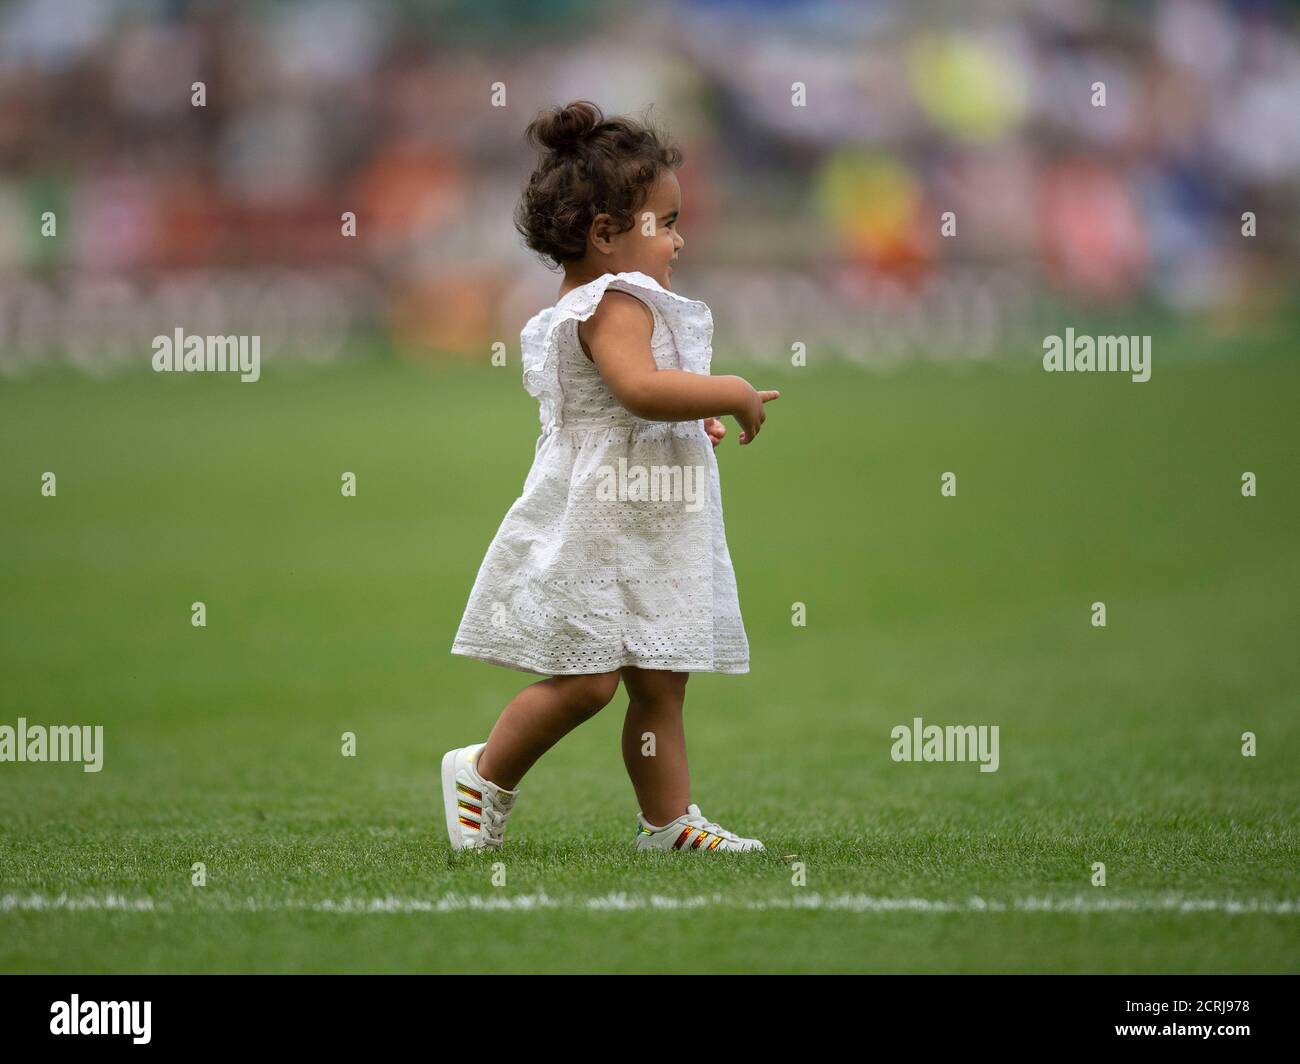 England's Manu Tuilagis daughter then decides that sheÕll catch up with dad again walking around the pitch   PHOTO CREDIT : © MARK PAIN / ALAMY STOCK Stock Photo